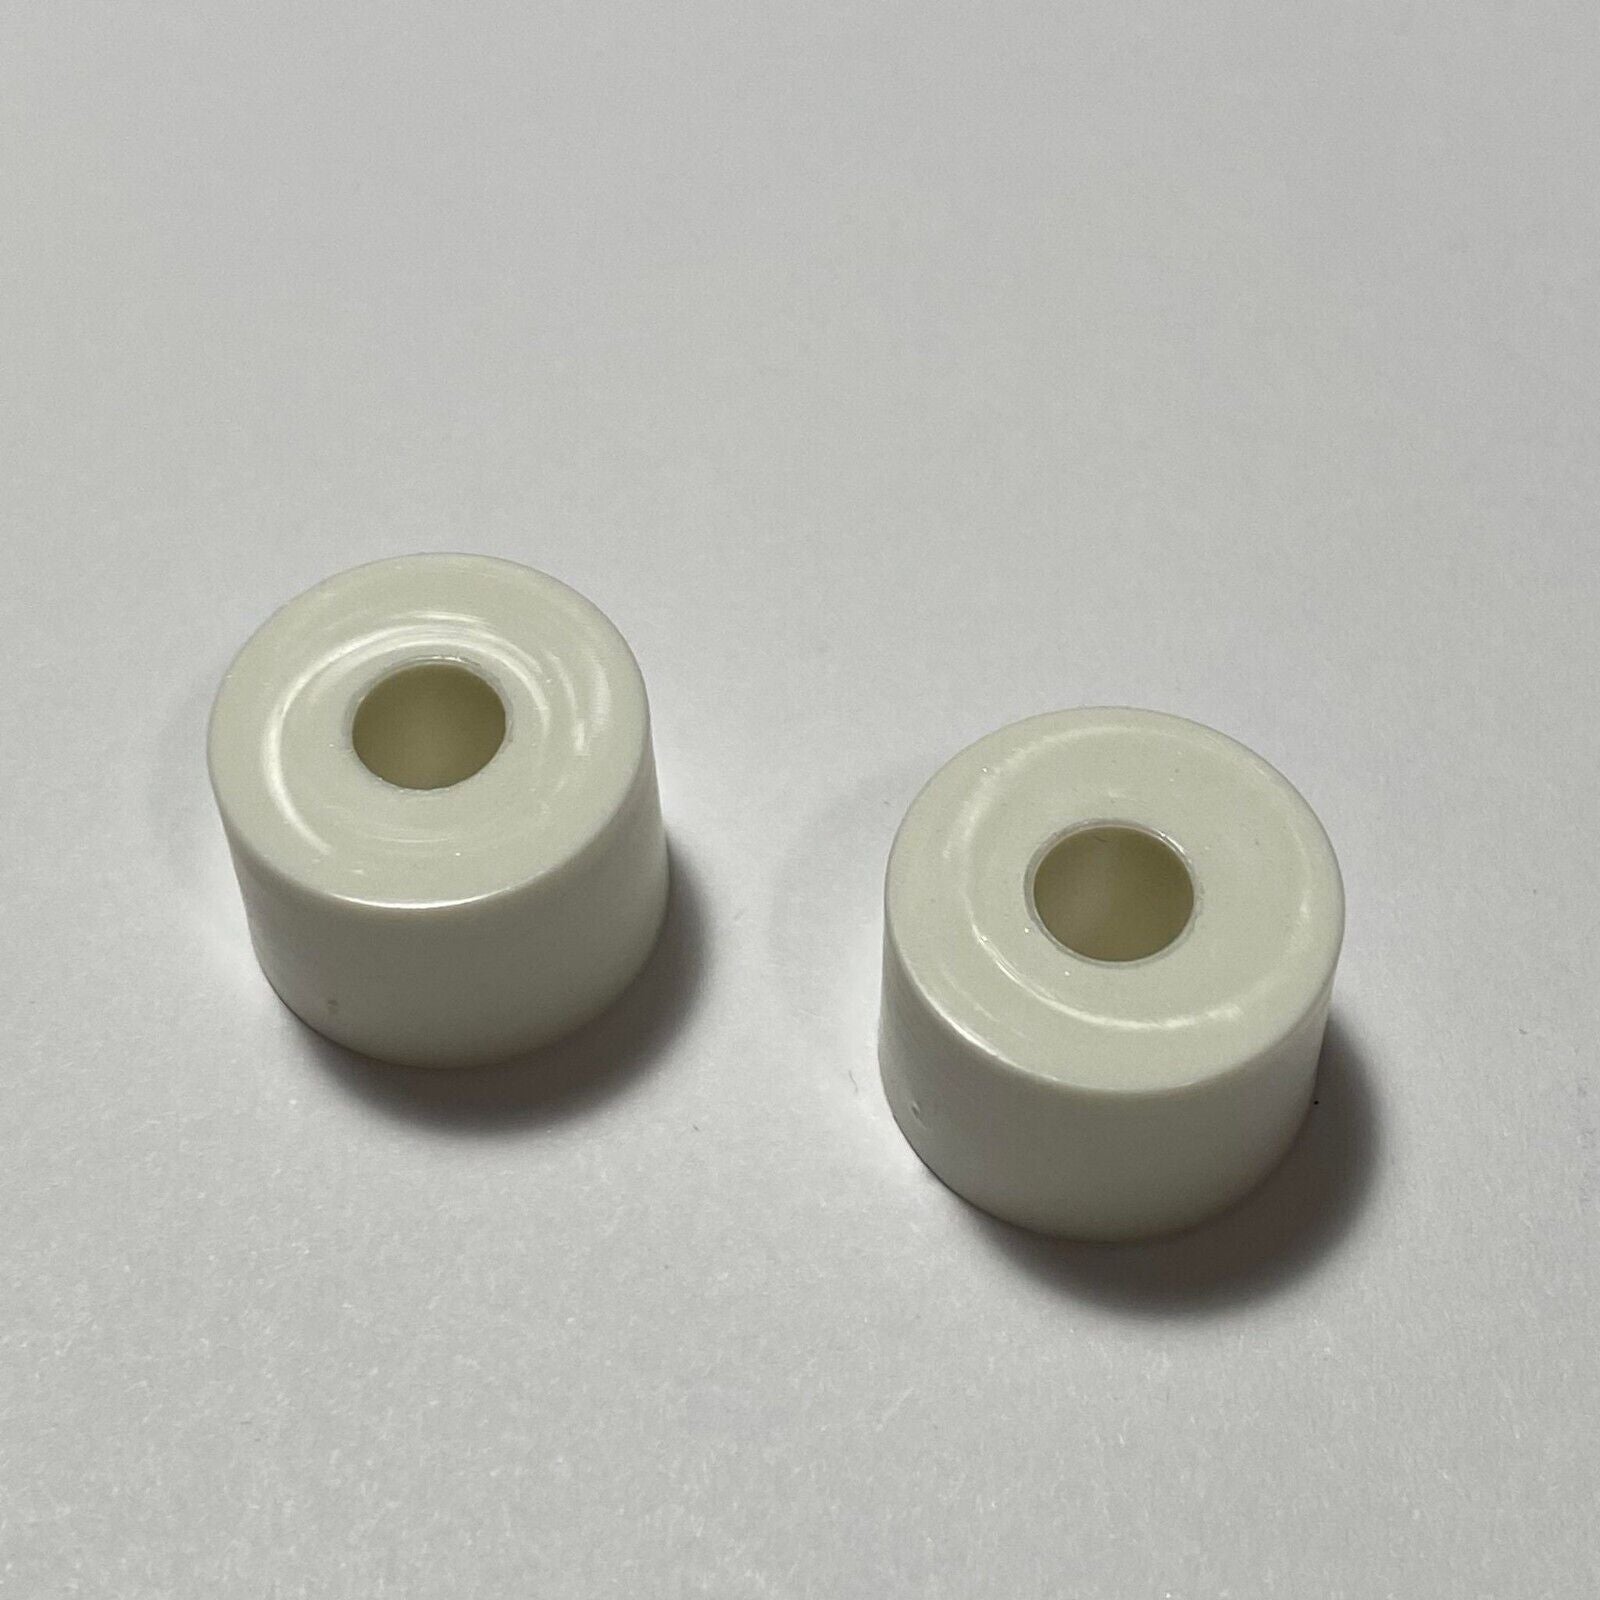 IKEA Part # 130900 130901 (2 pack) Spacer Disks Furniture Hardware Fitting White